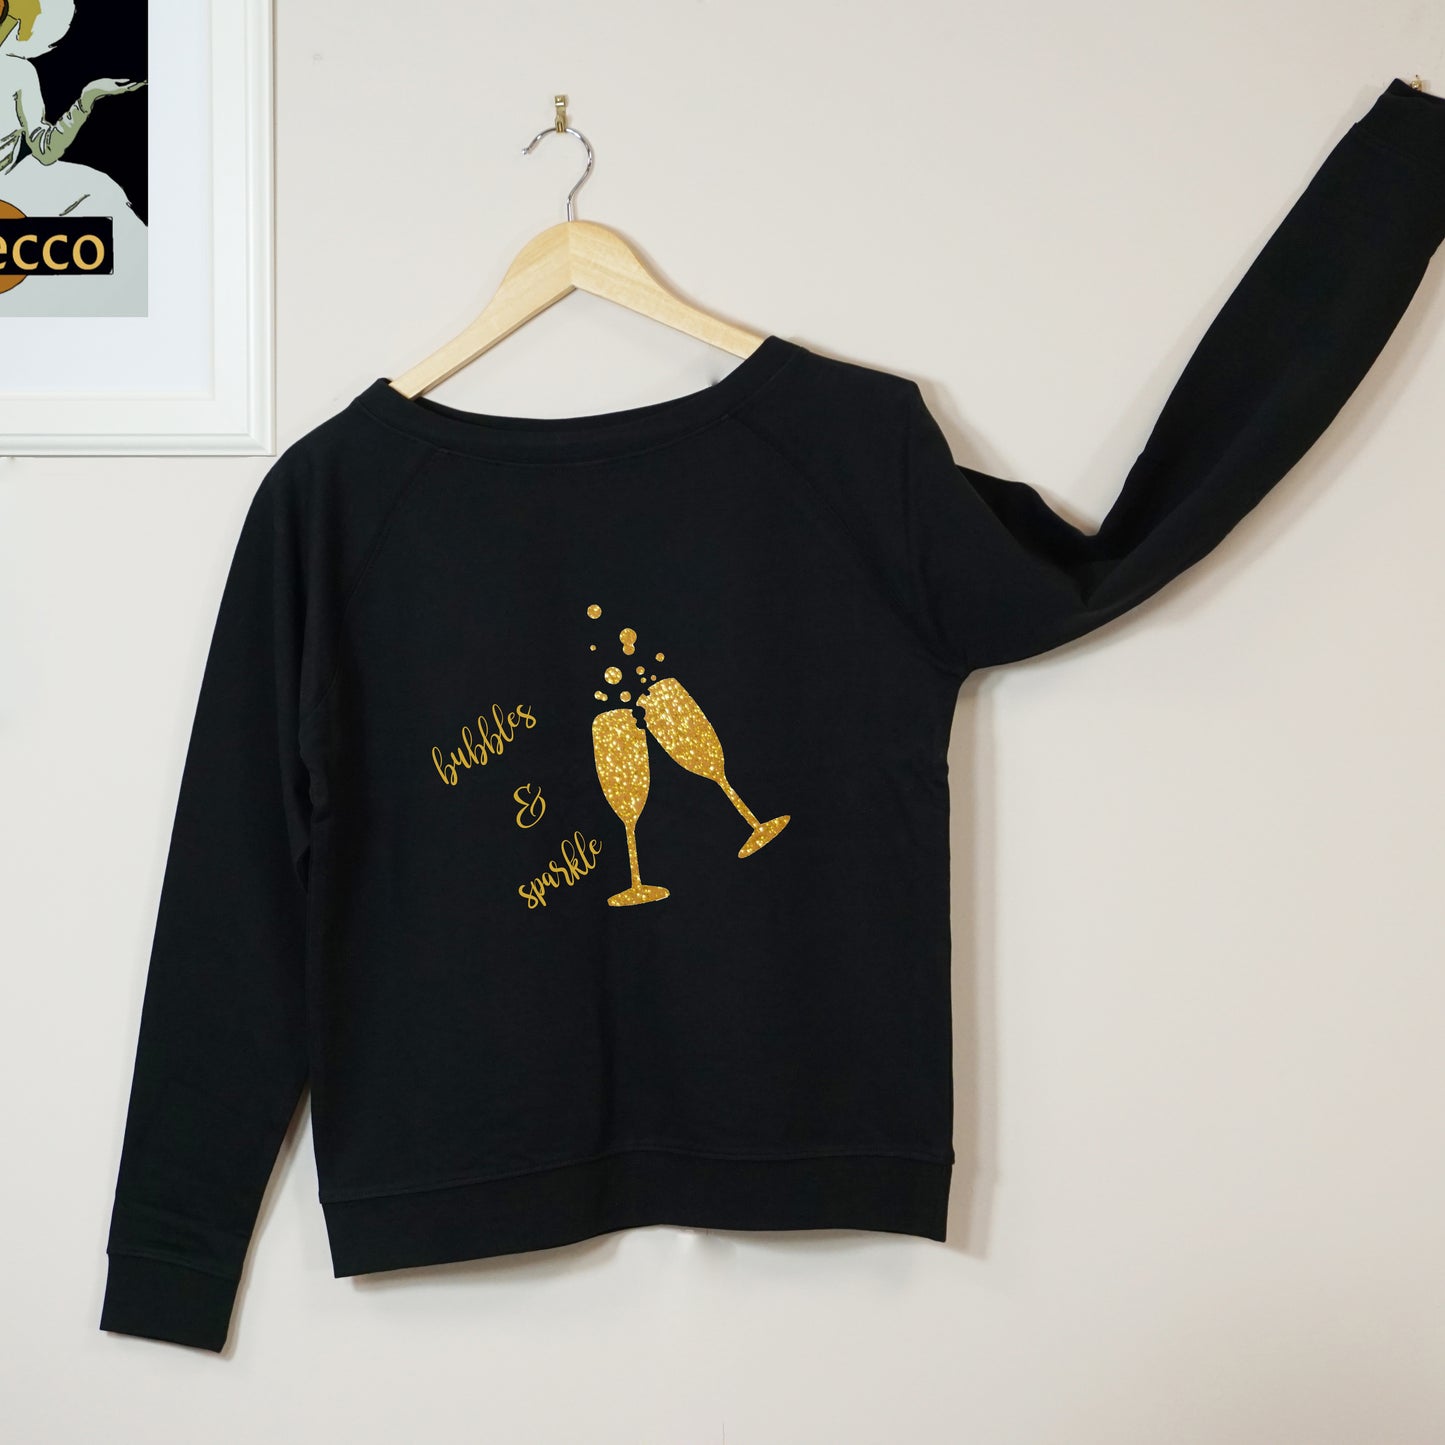 Black bubbles and sparkle celebration jumper with gold glitter decal